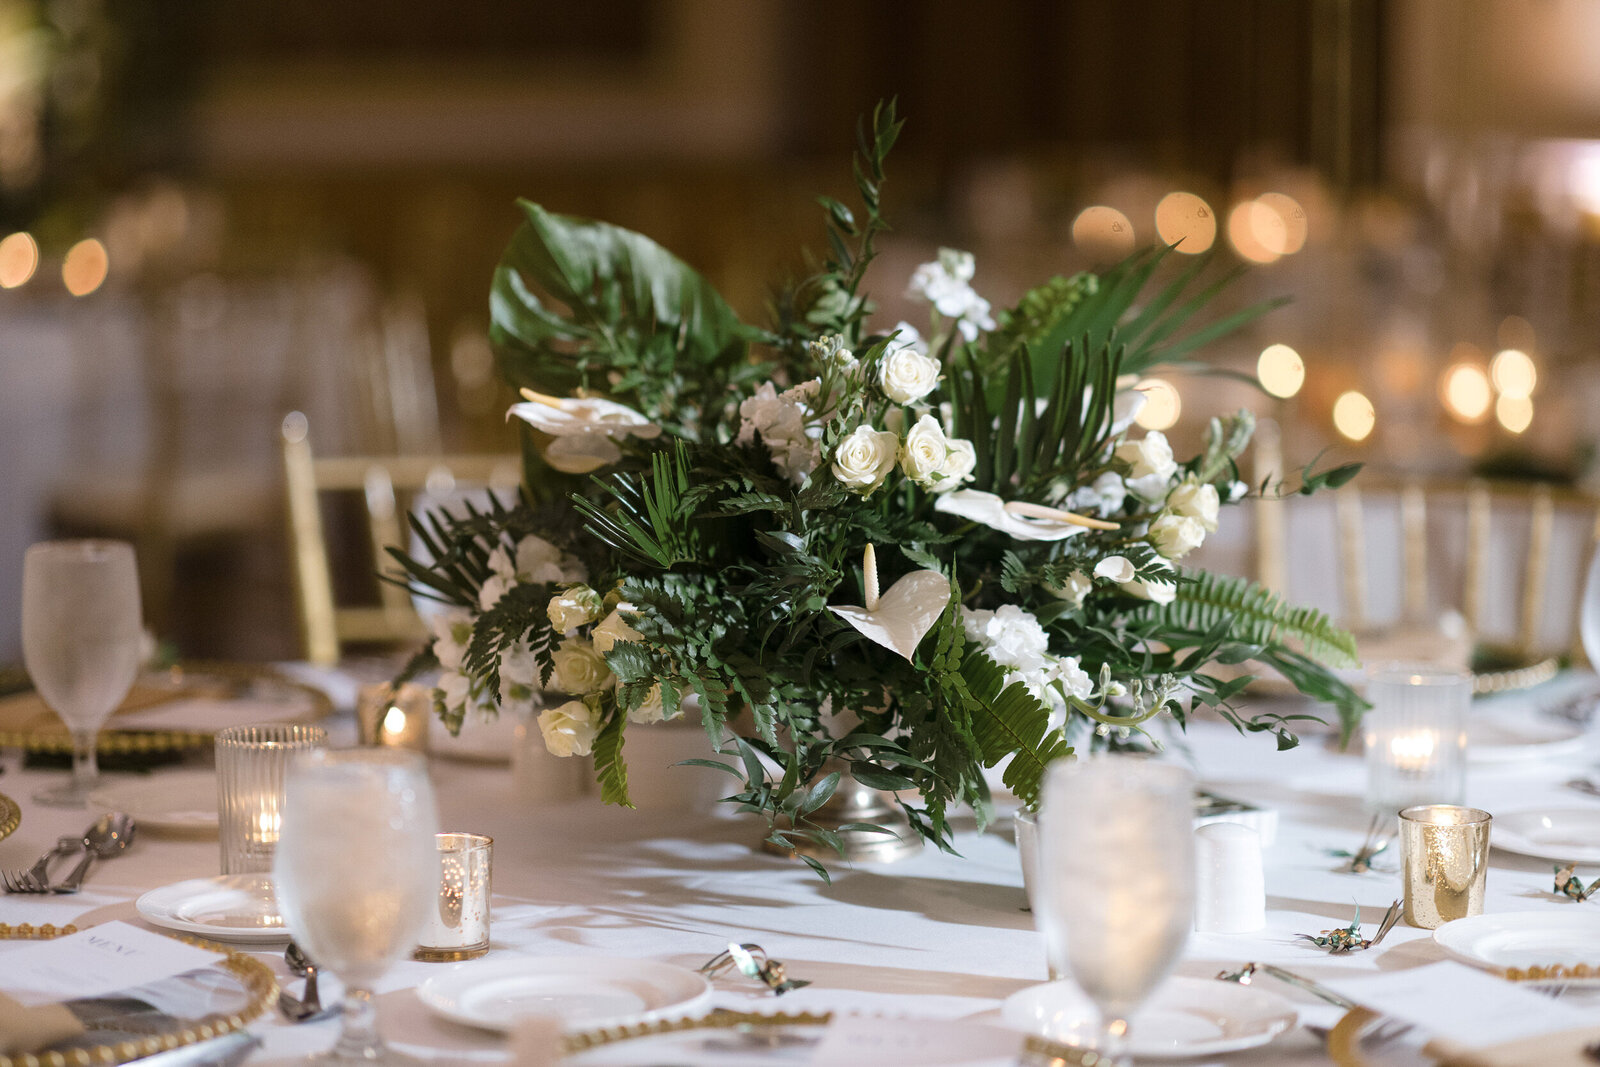 The hotel has several wedding venues to choose from, including the Riverside Ballroom, which can accommodate up to 200 guests. The ballroom features beautiful chandeliers and floor-to-ceiling windows with views of the New River.